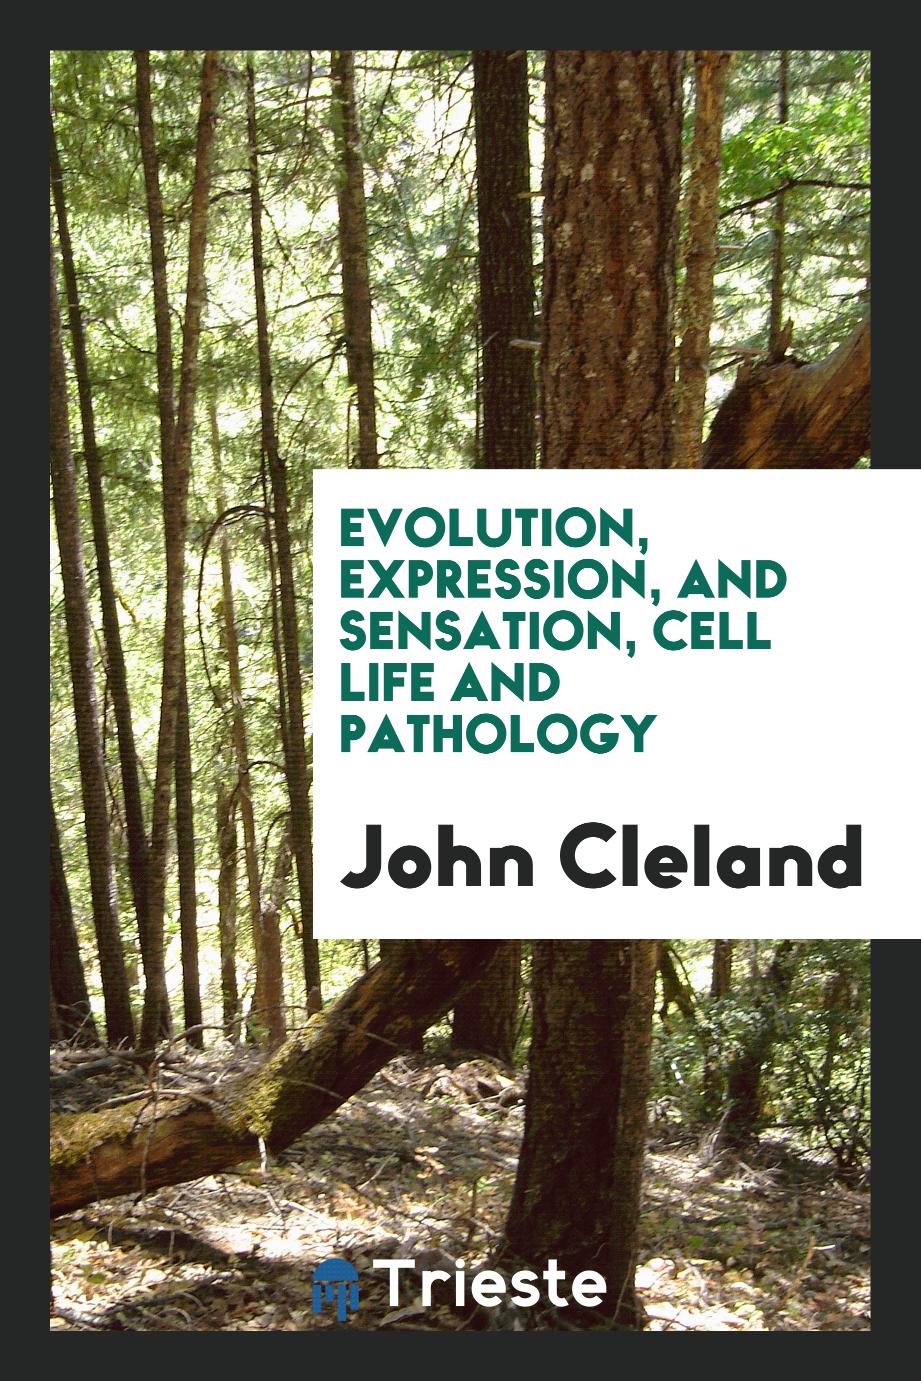 Evolution, expression, and sensation, cell life and pathology